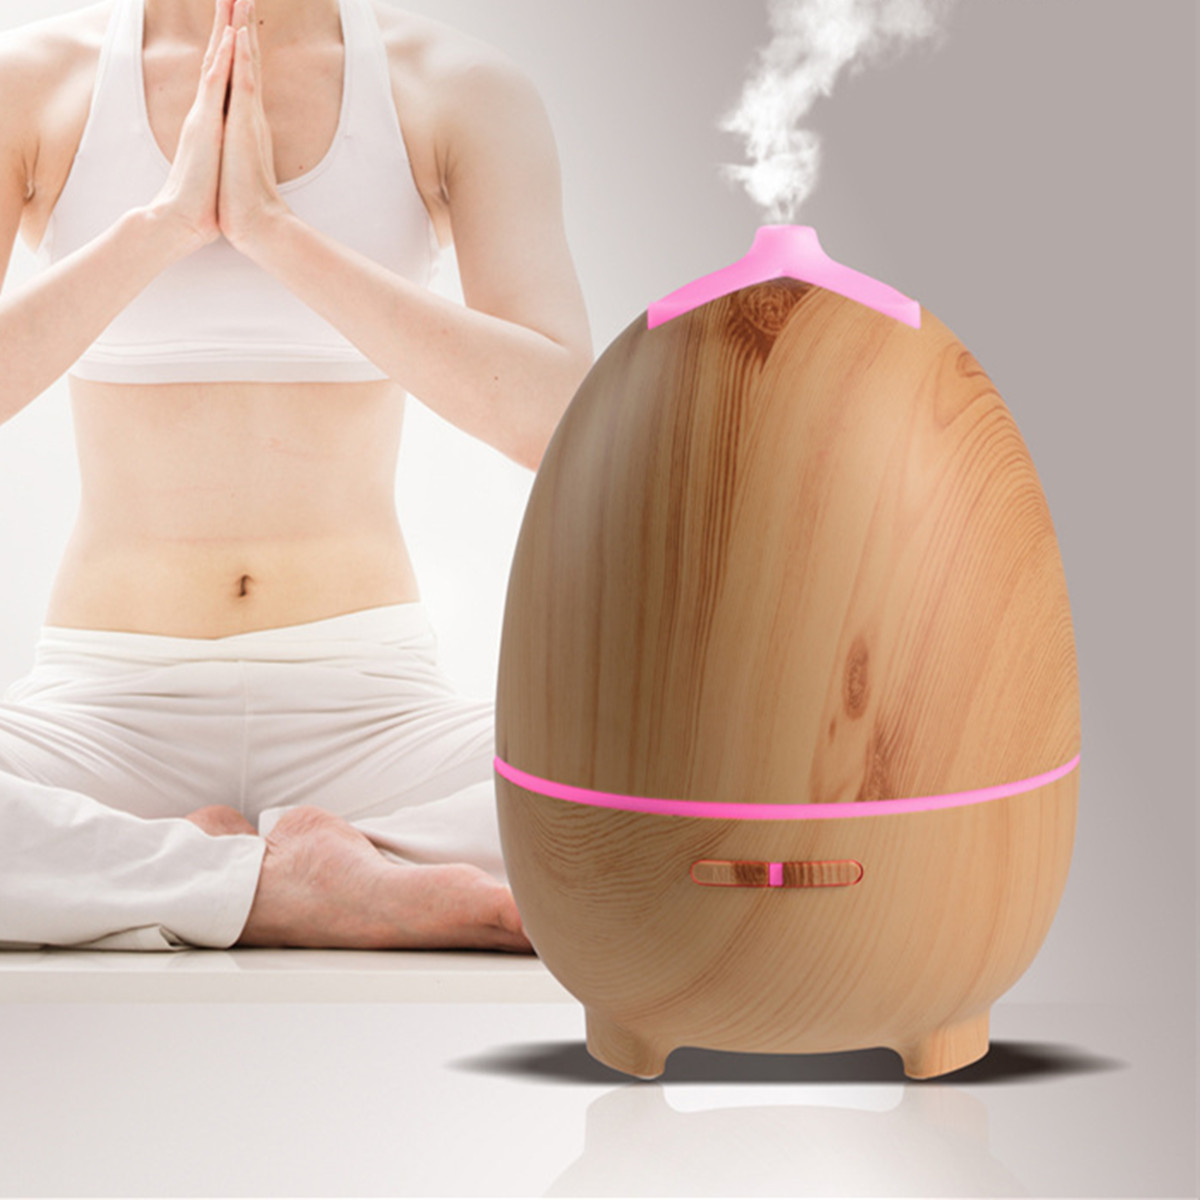 

300ML LED Essential Oils Ultrasonic Aromatherapy Diffuser Air Humidifier Purify Aroma Diffuser